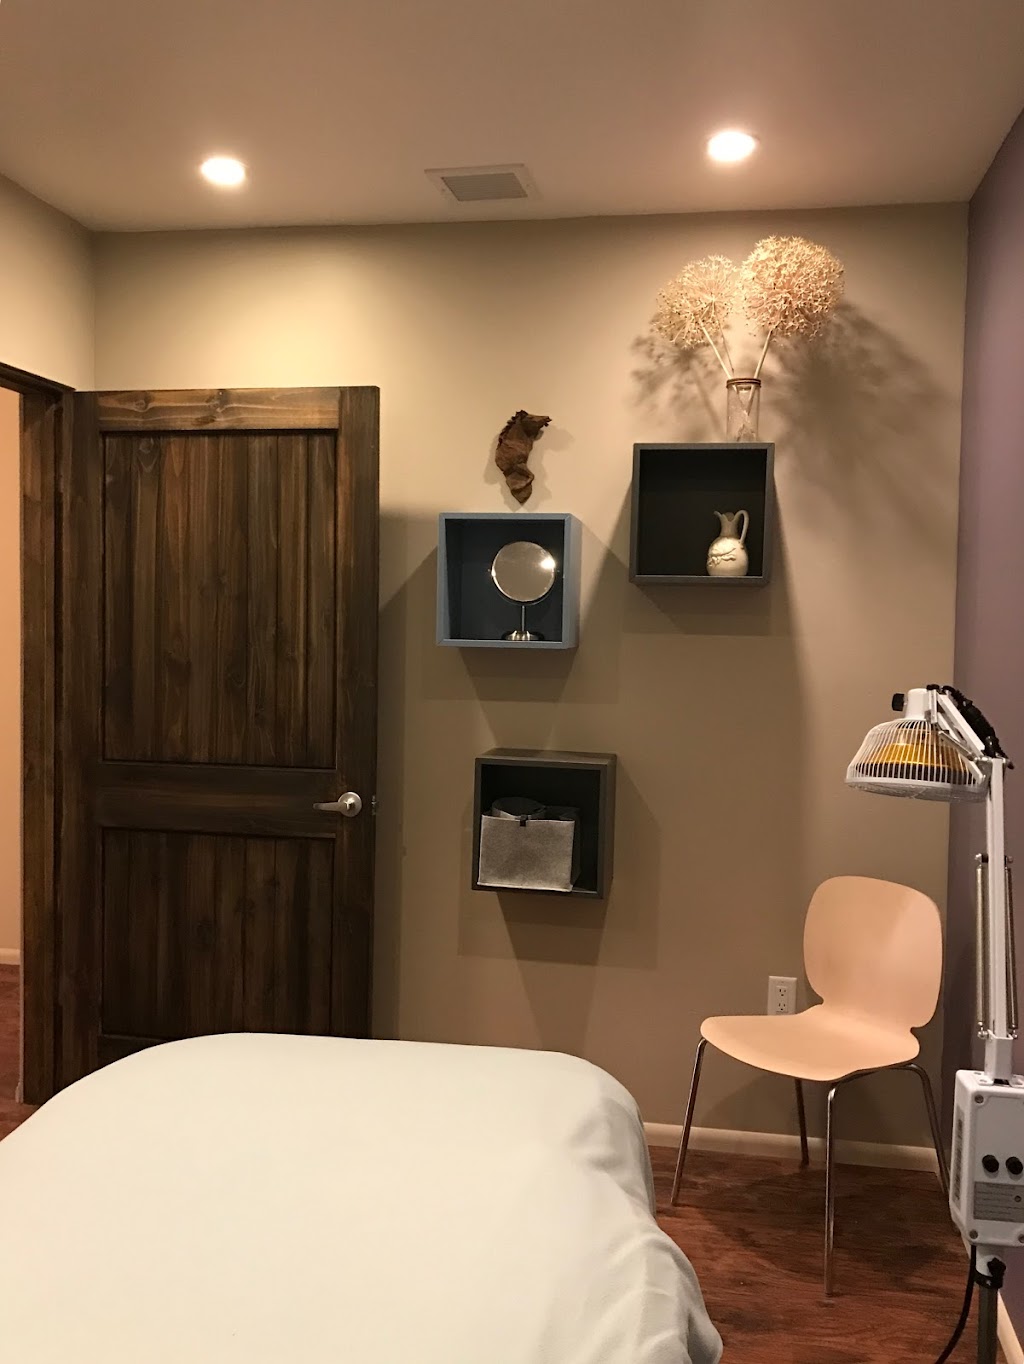 Golden West Acupuncture and Wellness LLC. | 590 Bosque Farms Blvd, Bosque Farms, NM 87068 | Phone: (505) 869-9283